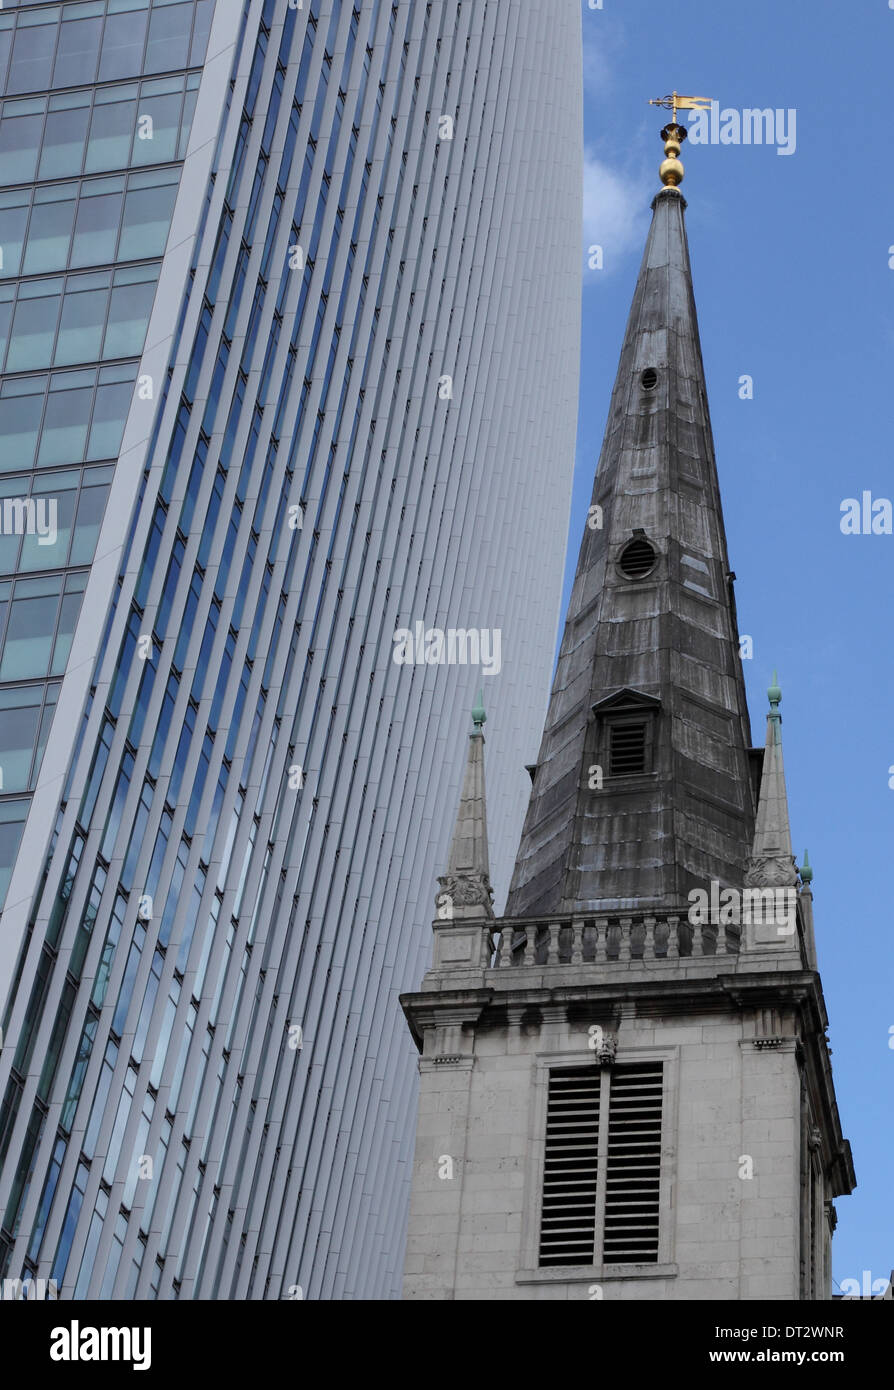 Steeple of The Old Church of St Margaret Pattens with the Walkie Talkie building in the background Stock Photo